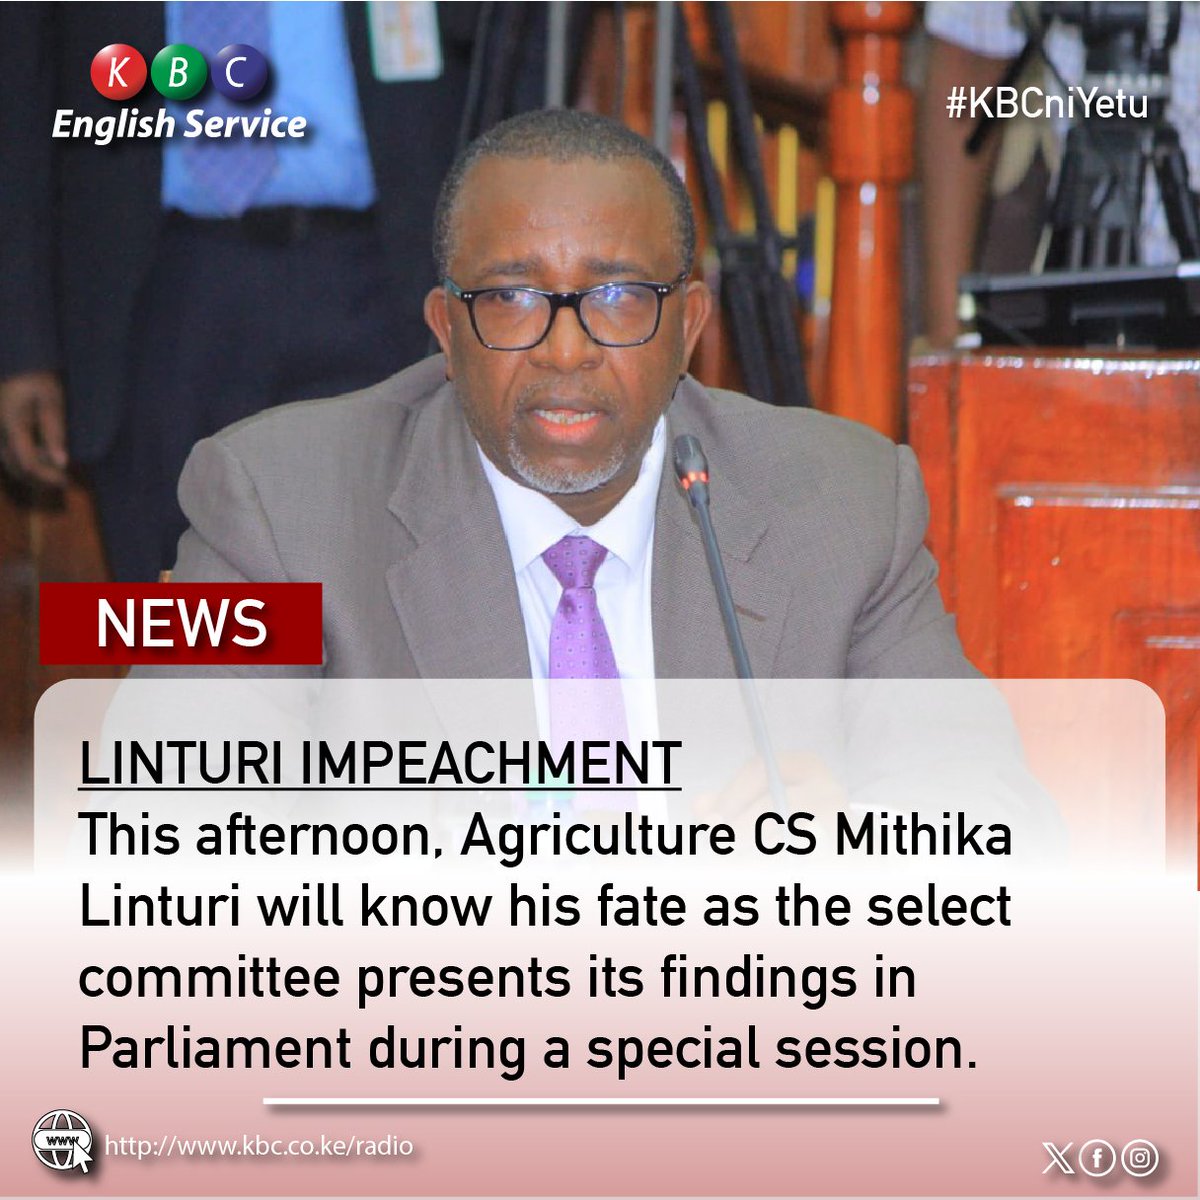 LINTURI IMPEACHMENT This afternoon, Agriculture CS Mithika Linturi will know his fate as the select committee presents its findings in Parliament during a special session. ^PMN #KBCEnglishService